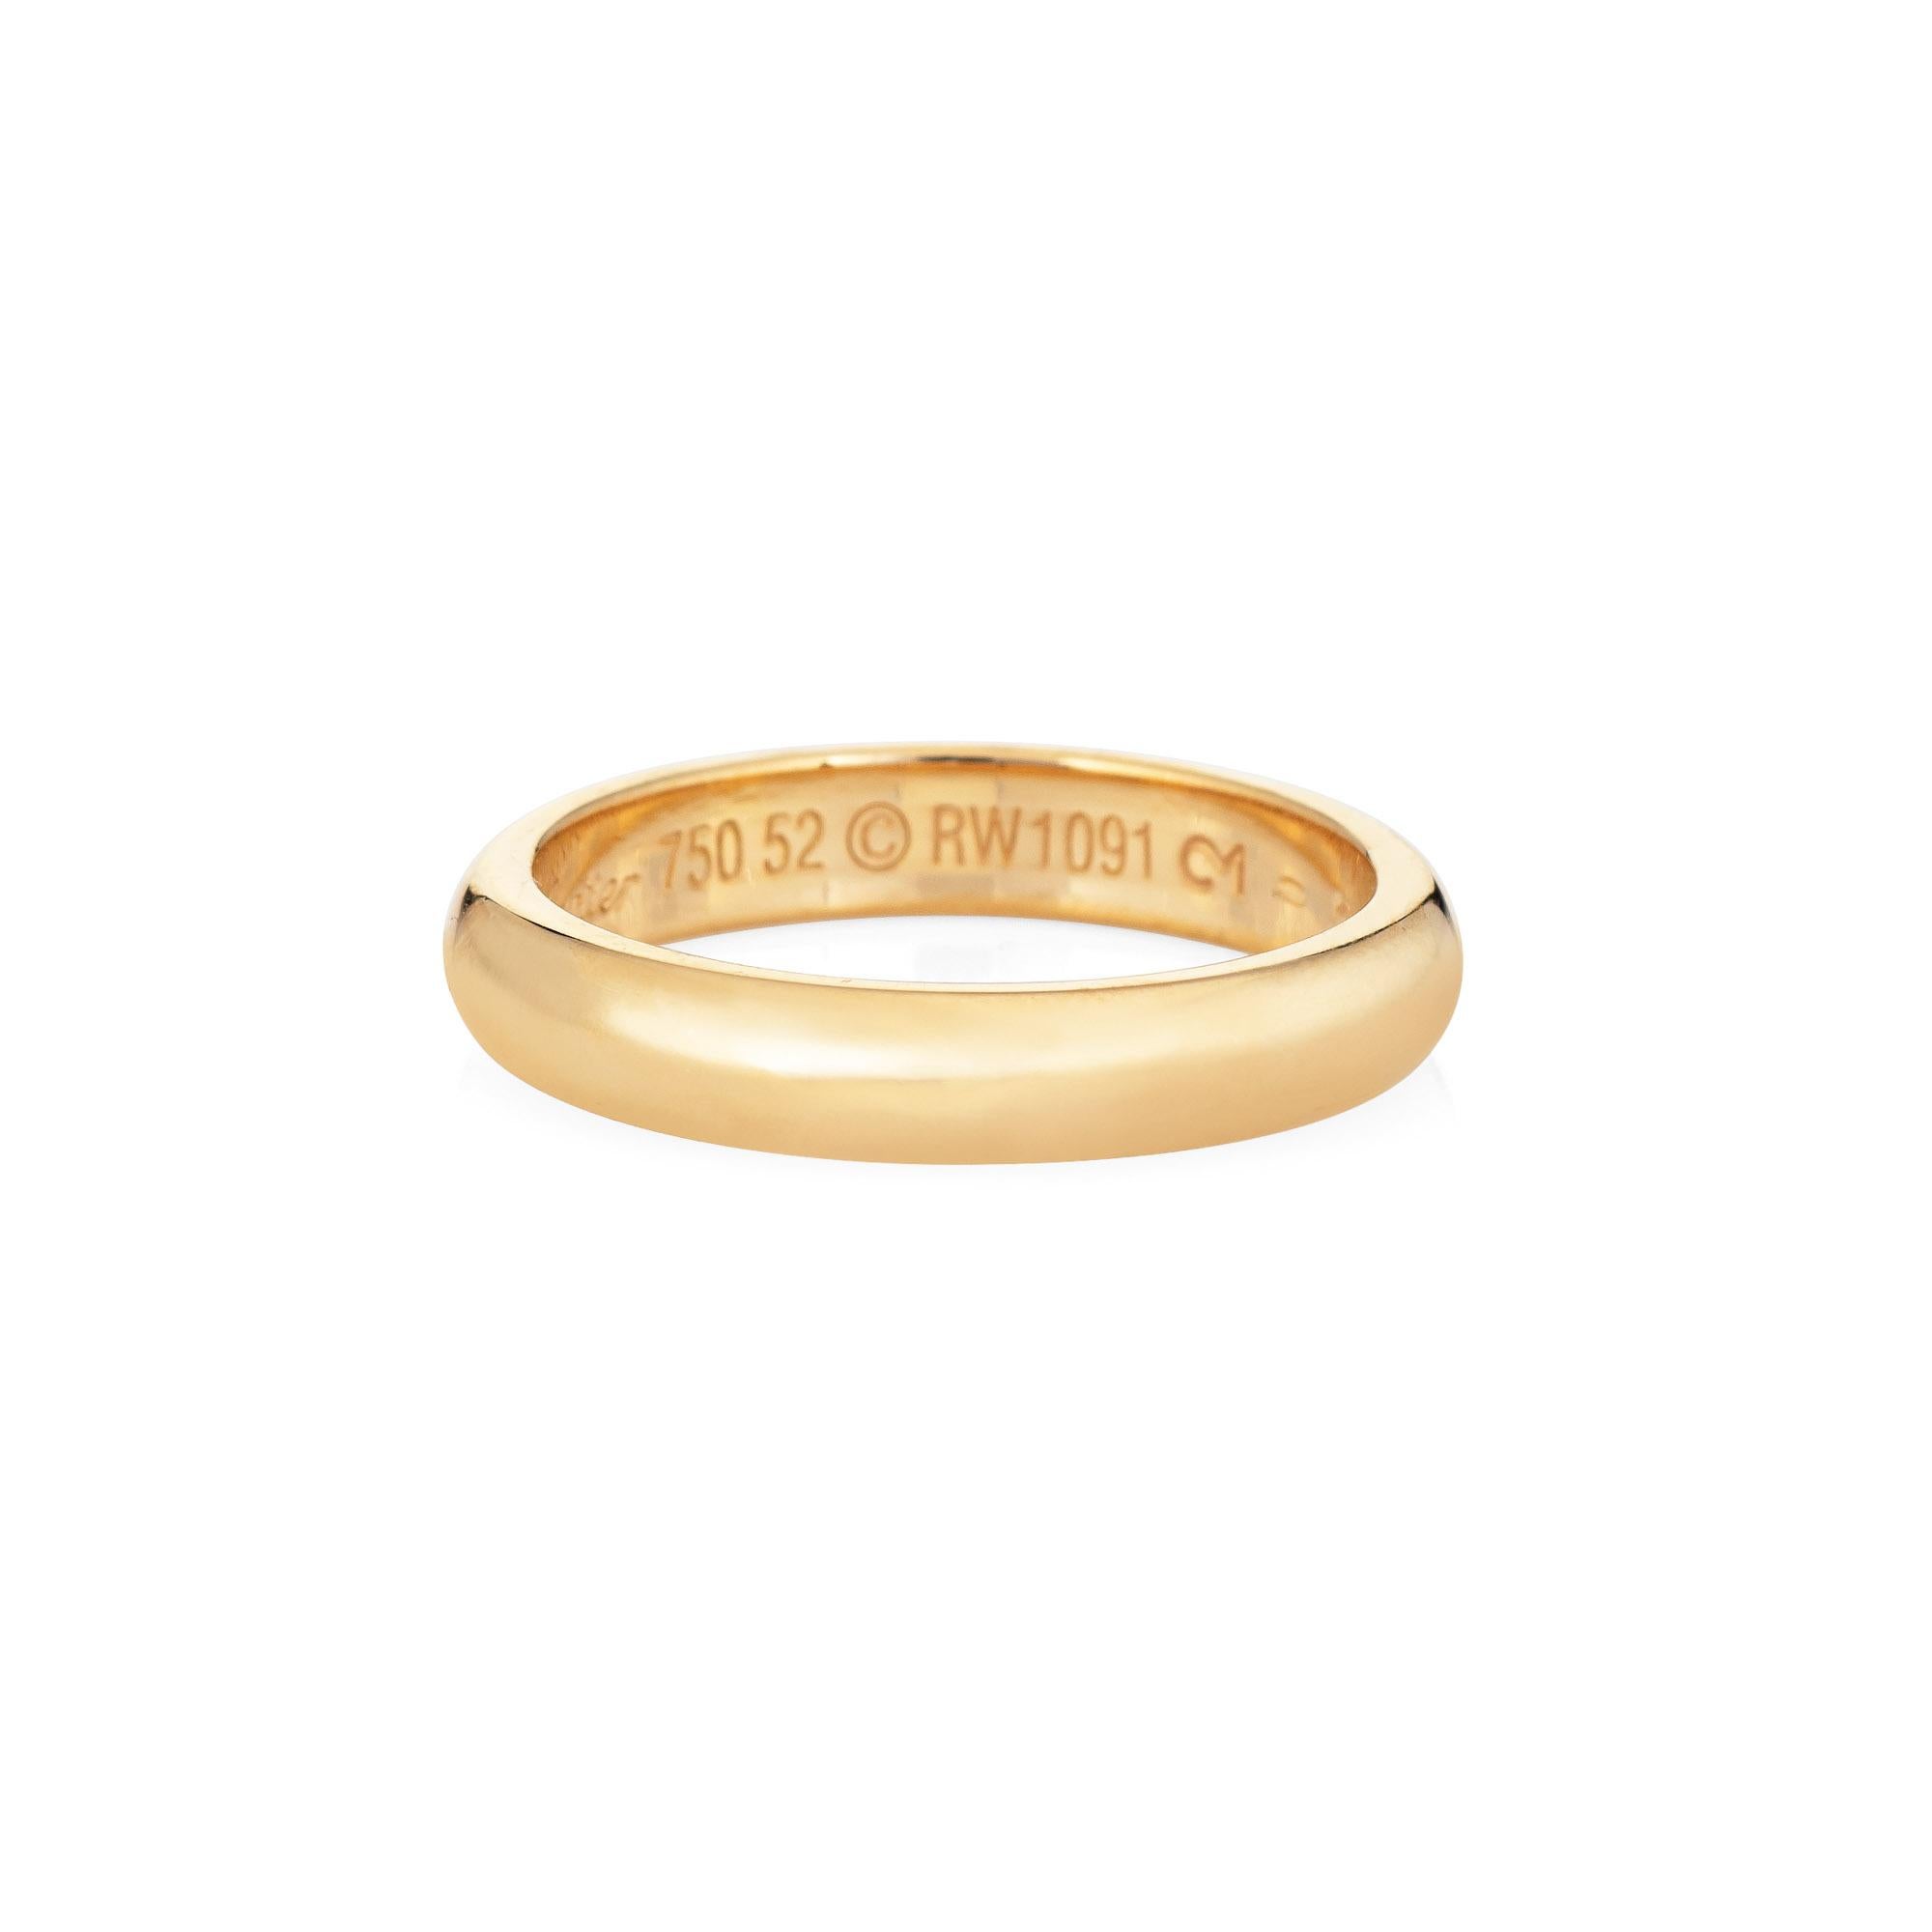 Pre-owned Cartier 1895 wedding band crafted in 18k yellow gold.  

The Cartier ring features a high polish outer band. The 3.5mm wide ring is great worn alone or layered with your fine jewelry from any era.

The ring is in very good condition and